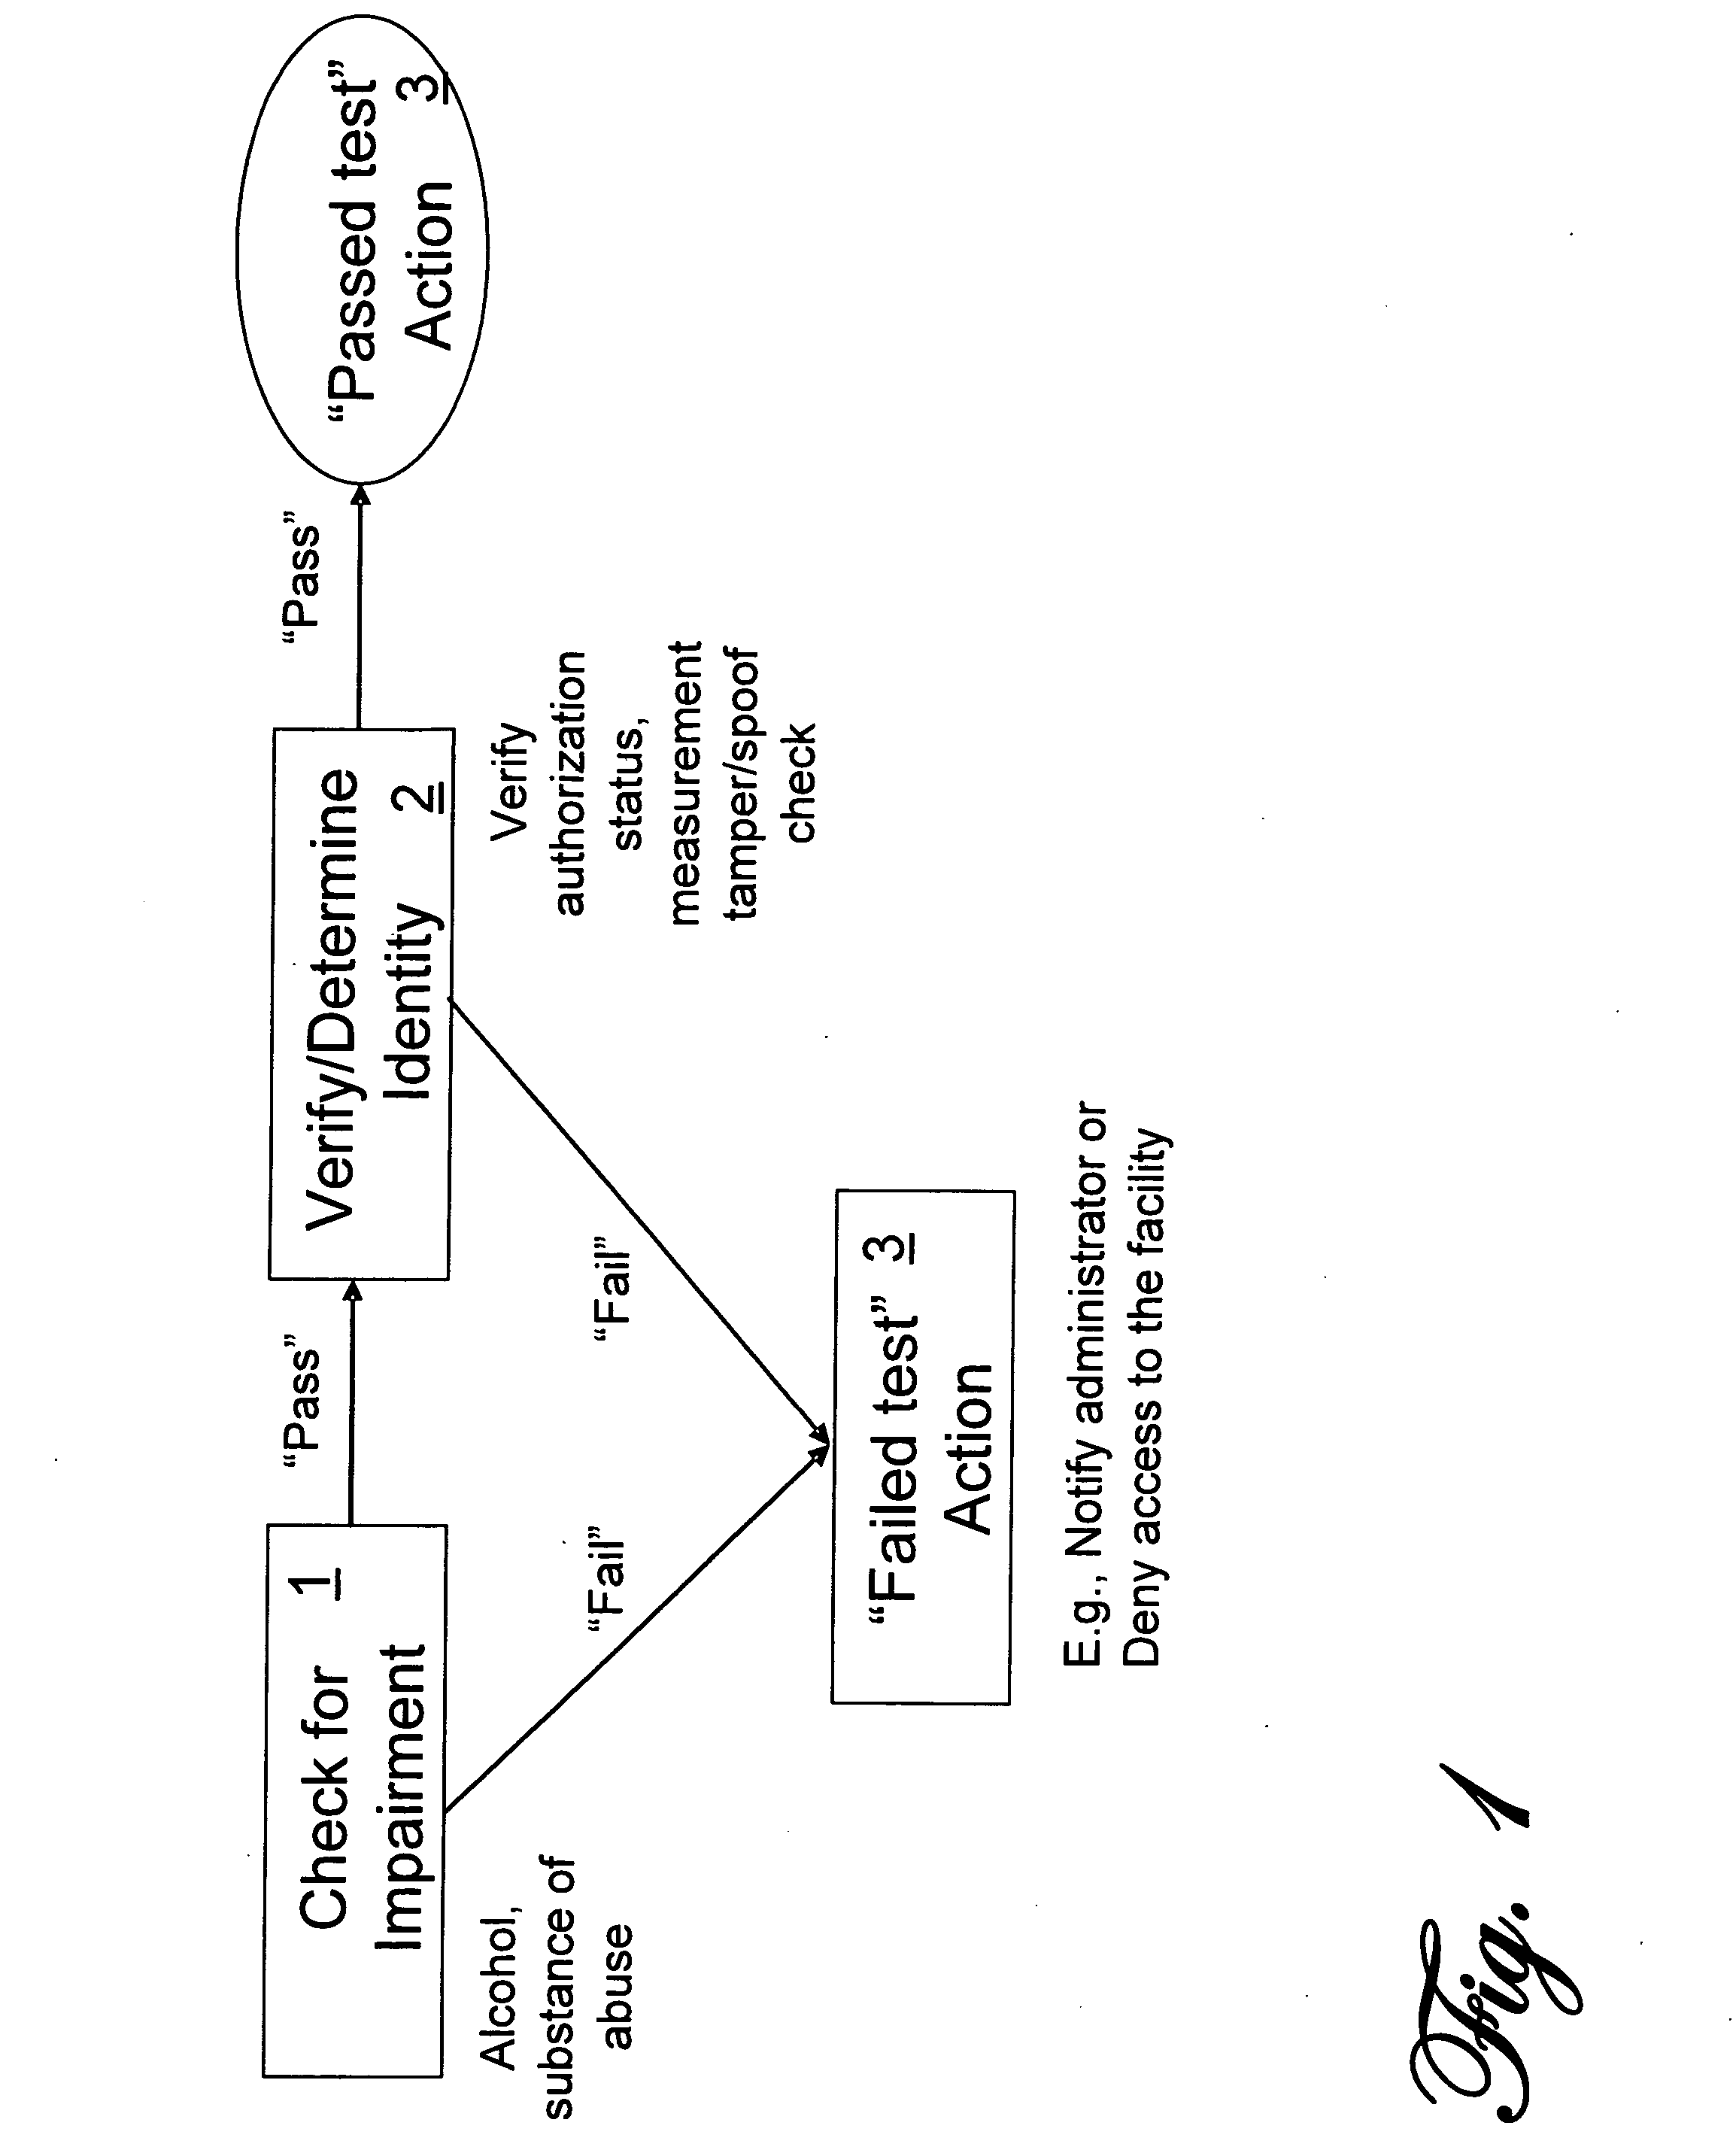 Apparatus and method for noninvasively monitoring for the presence of alcohol or substances of abuse in controlled environments